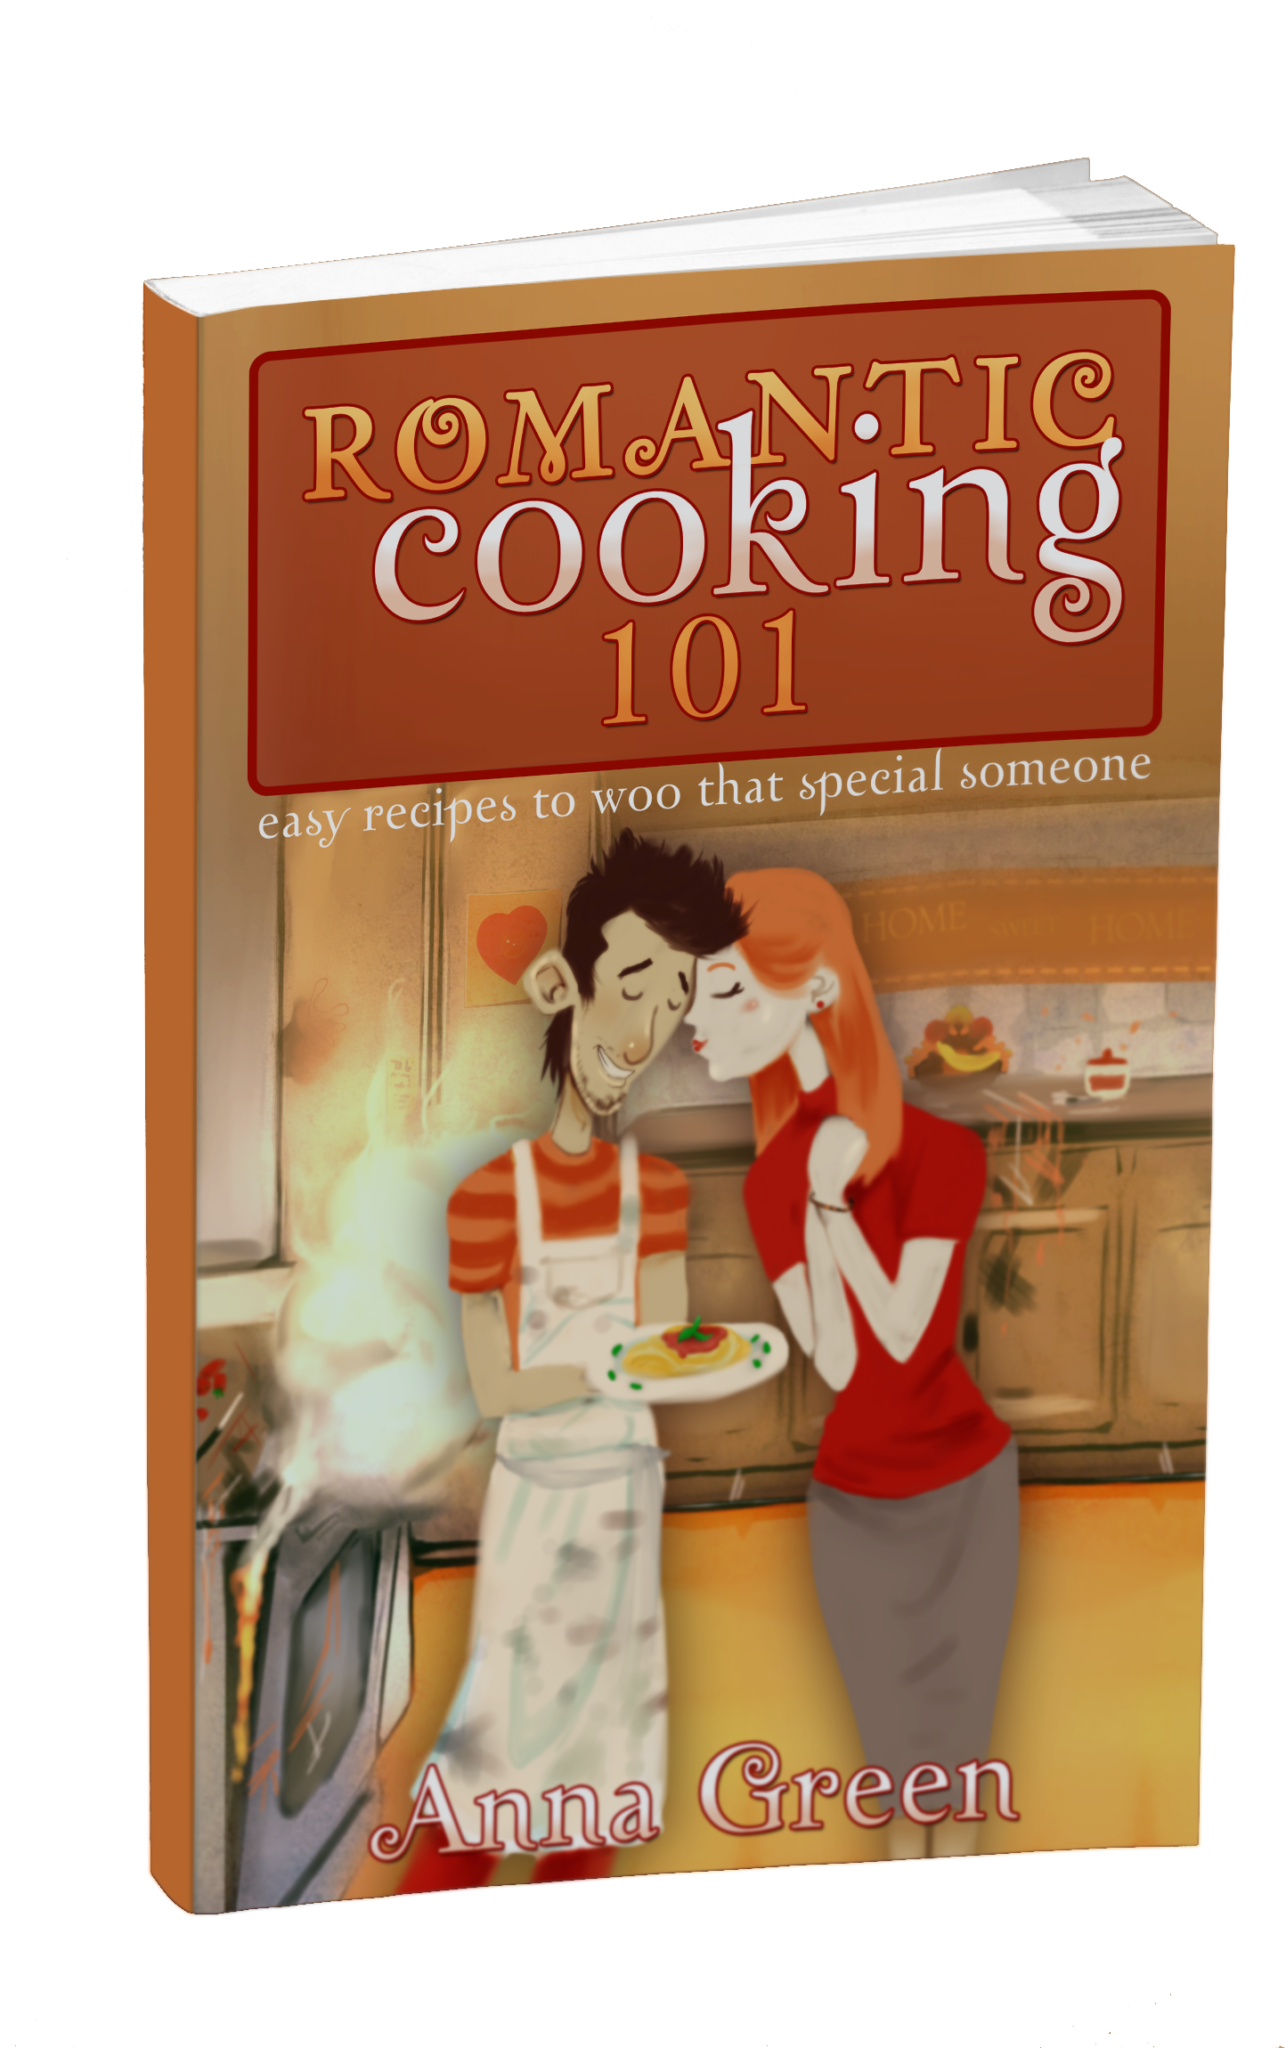 FREE: Romantic Cooking 101: Easy recipes to woo that special someone by Anna Green